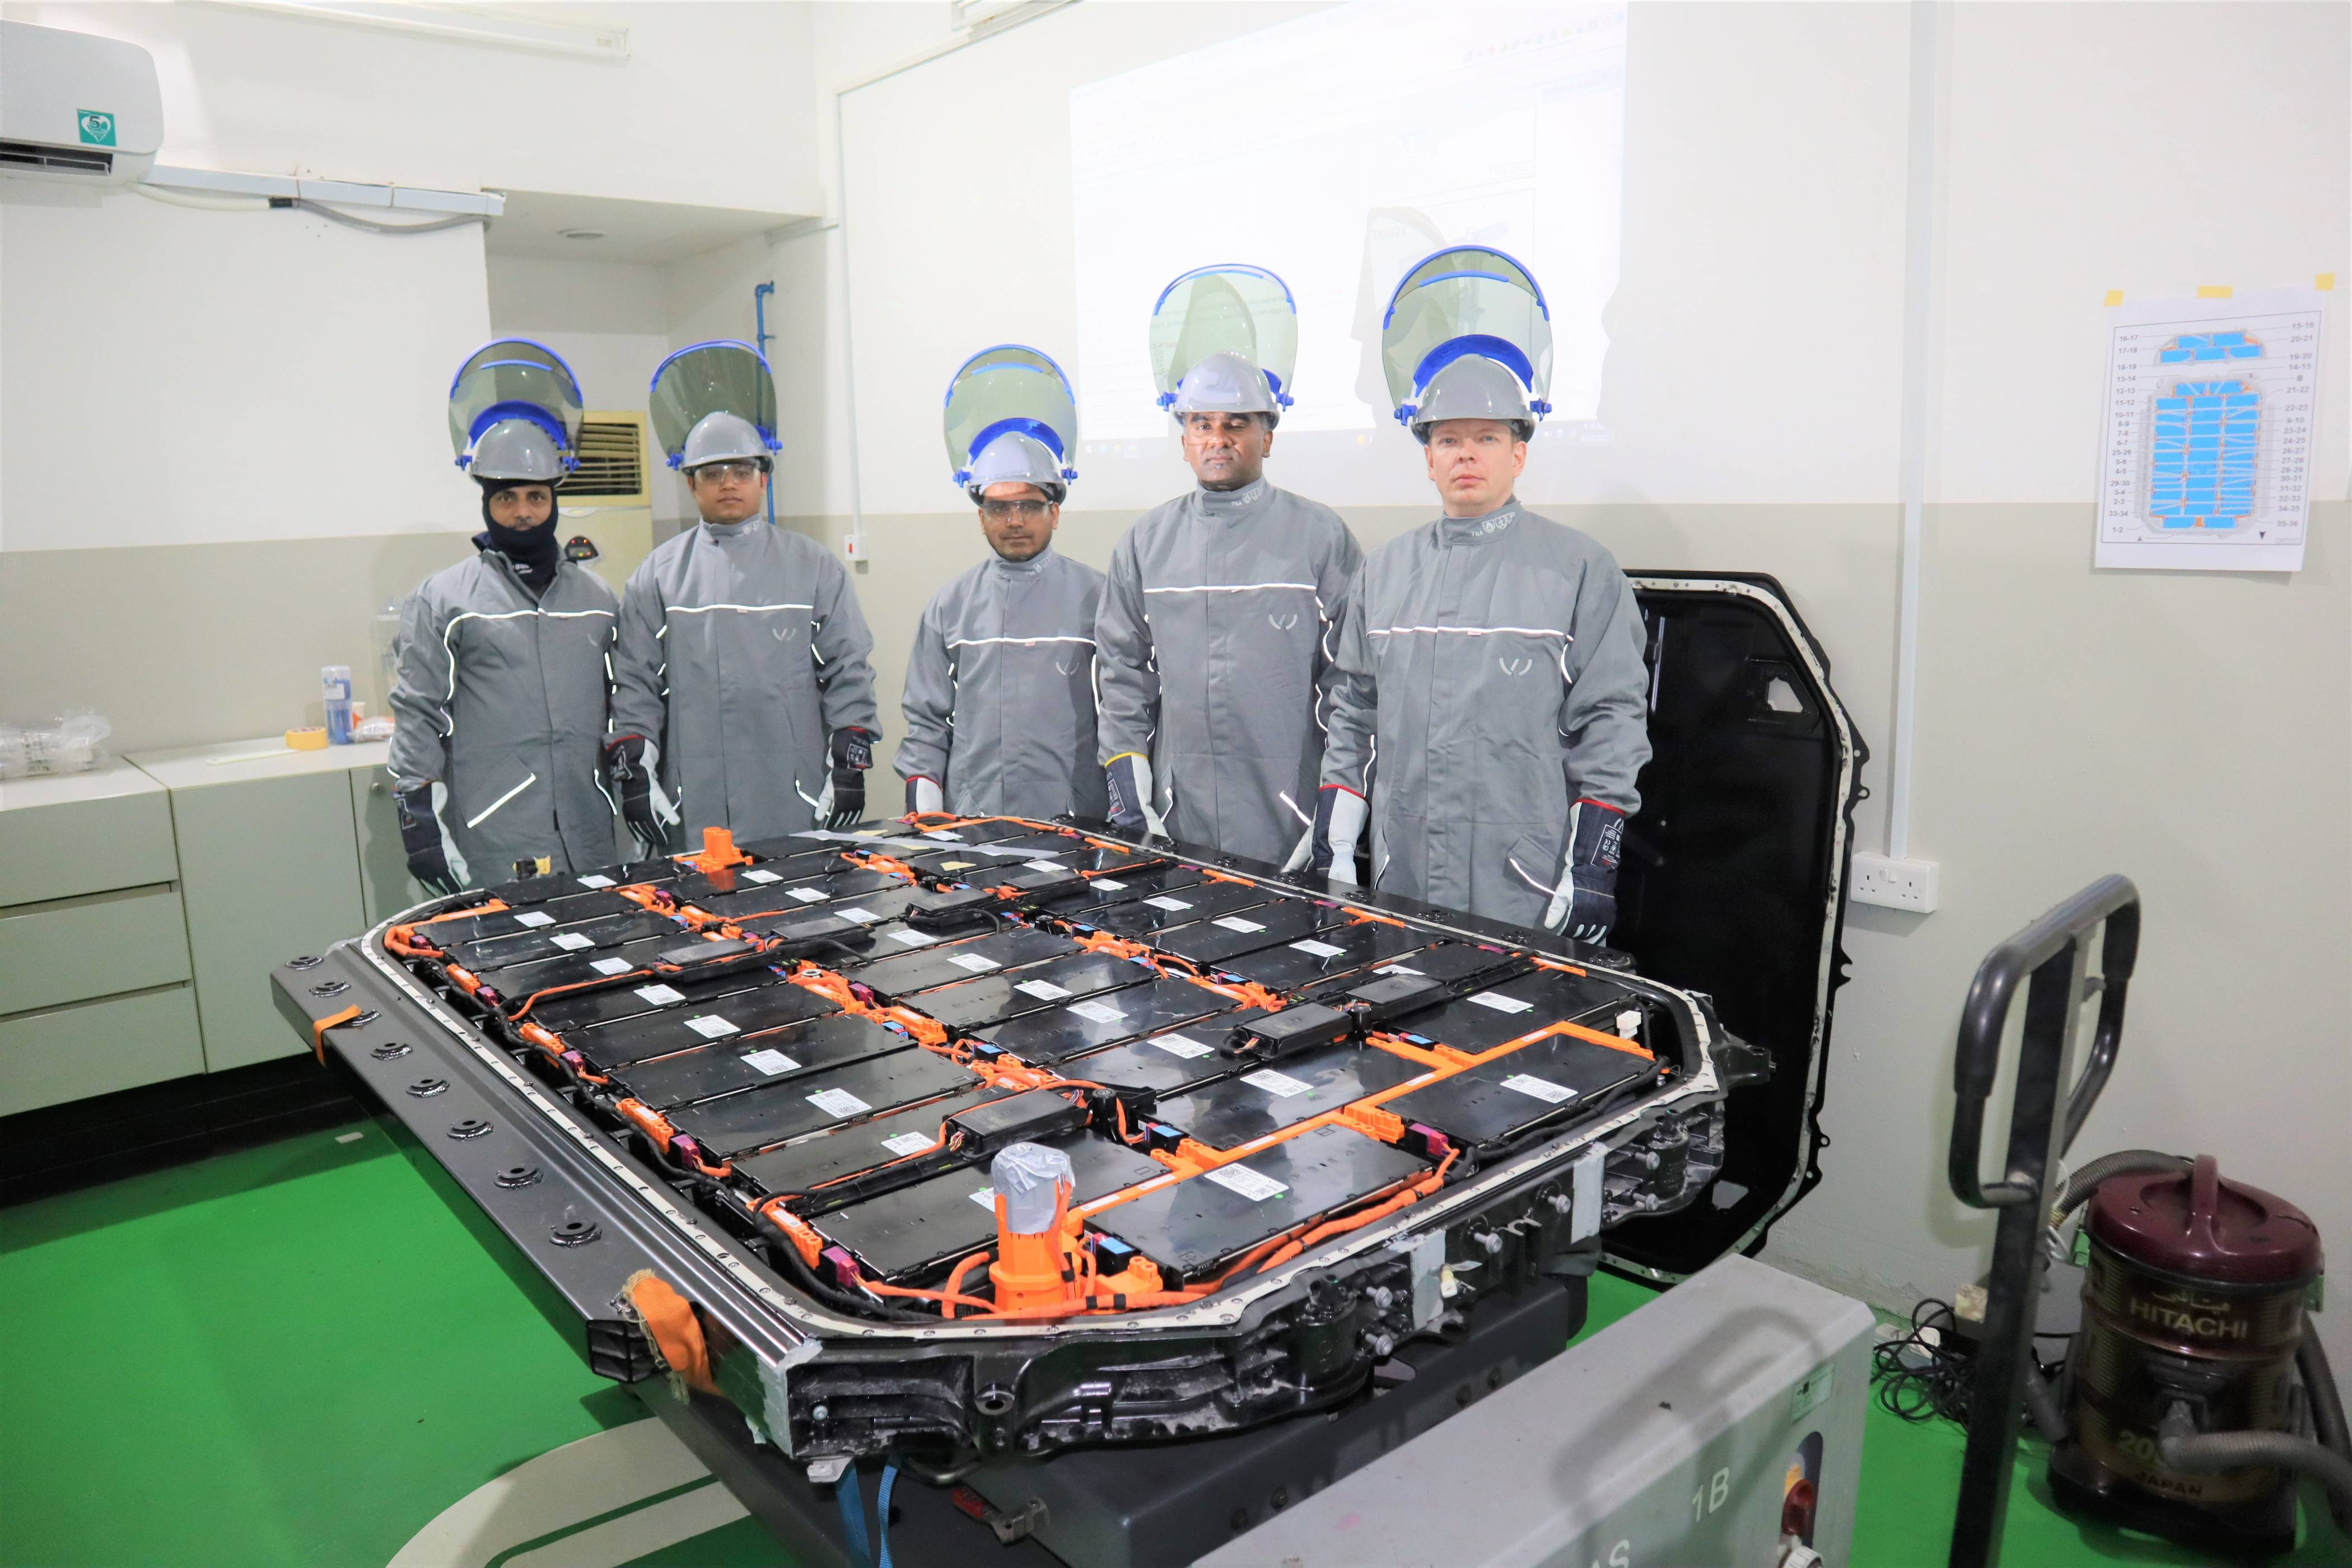 Audi Middle East completes first training of High Voltage Experts in the region.